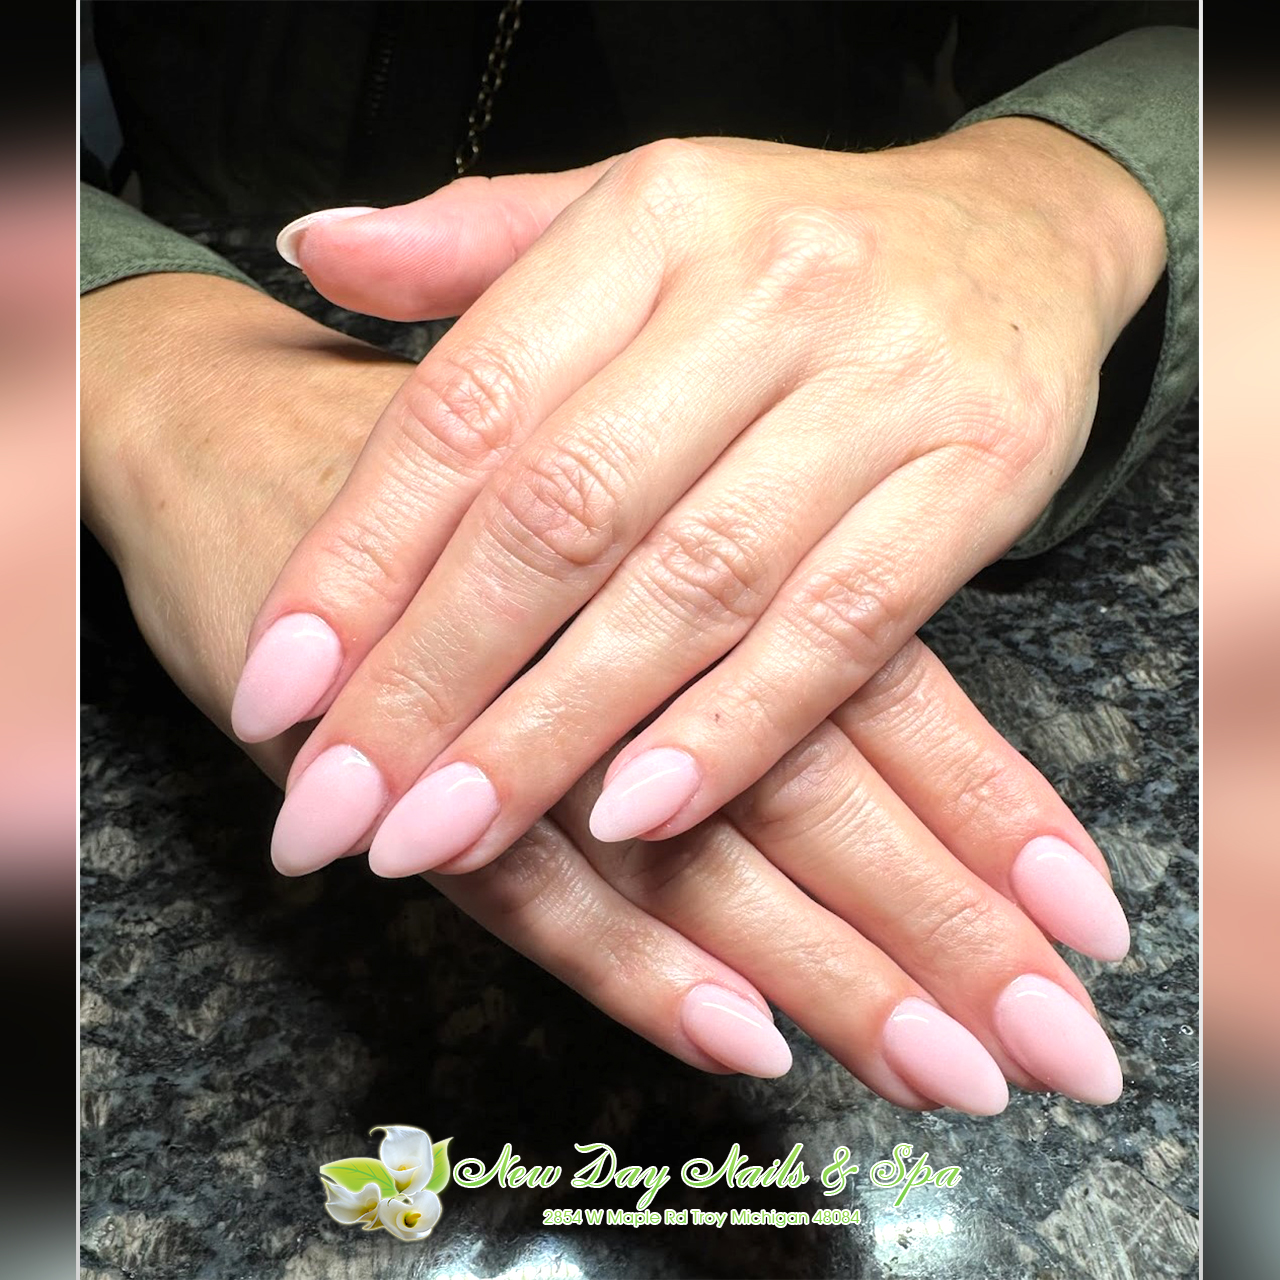 New Day Nails & Spa | Nails salon in Troy MI 48084